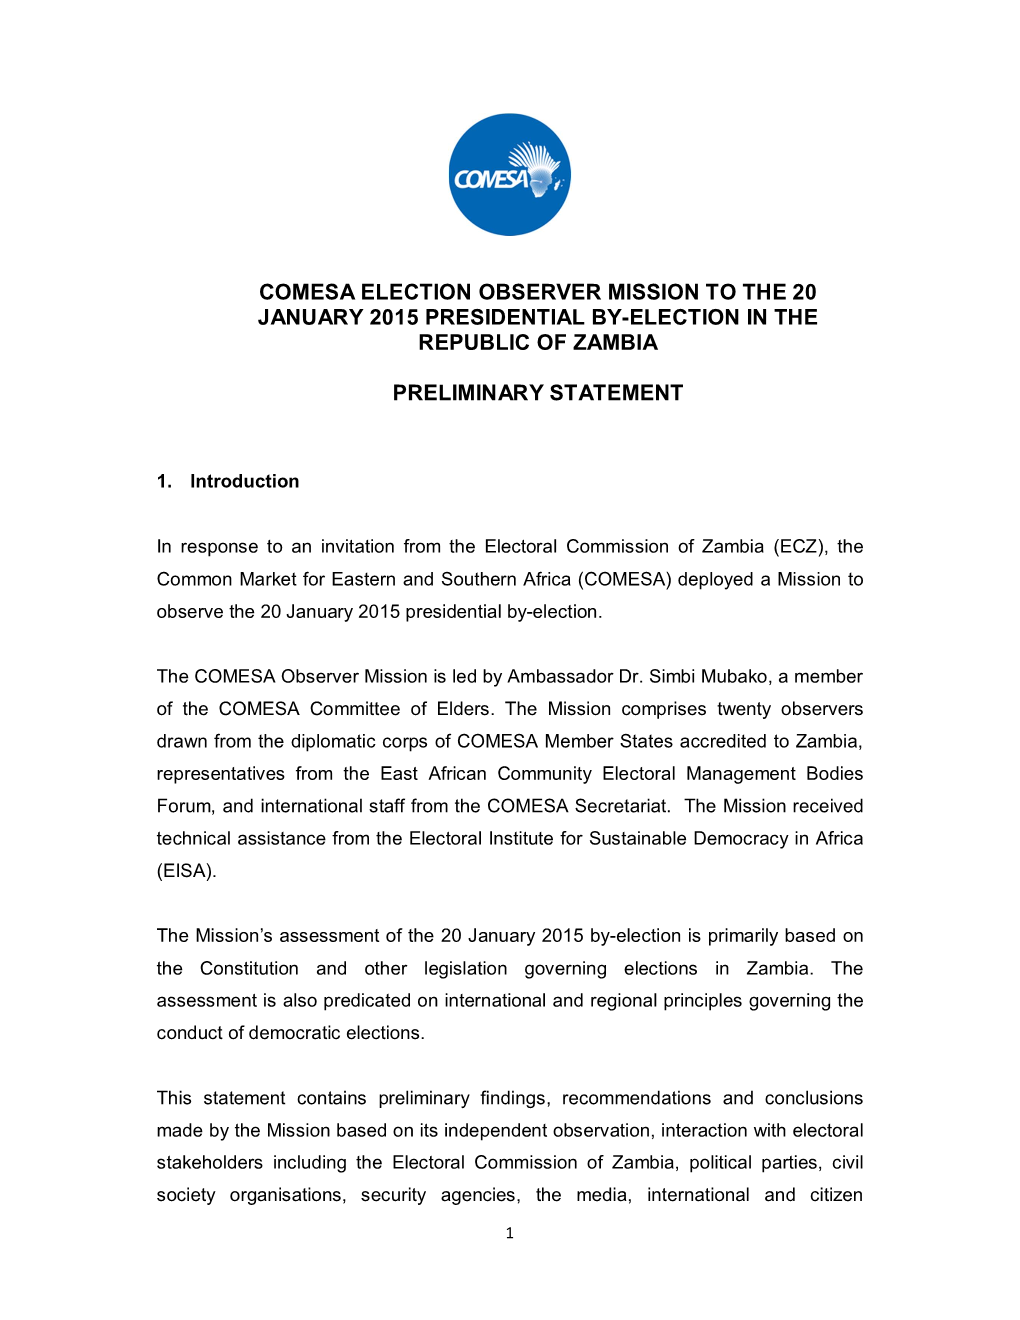 Comesa Election Observer Mission to the 20 January 2015 Presidential By-Election in the Republic of Zambia